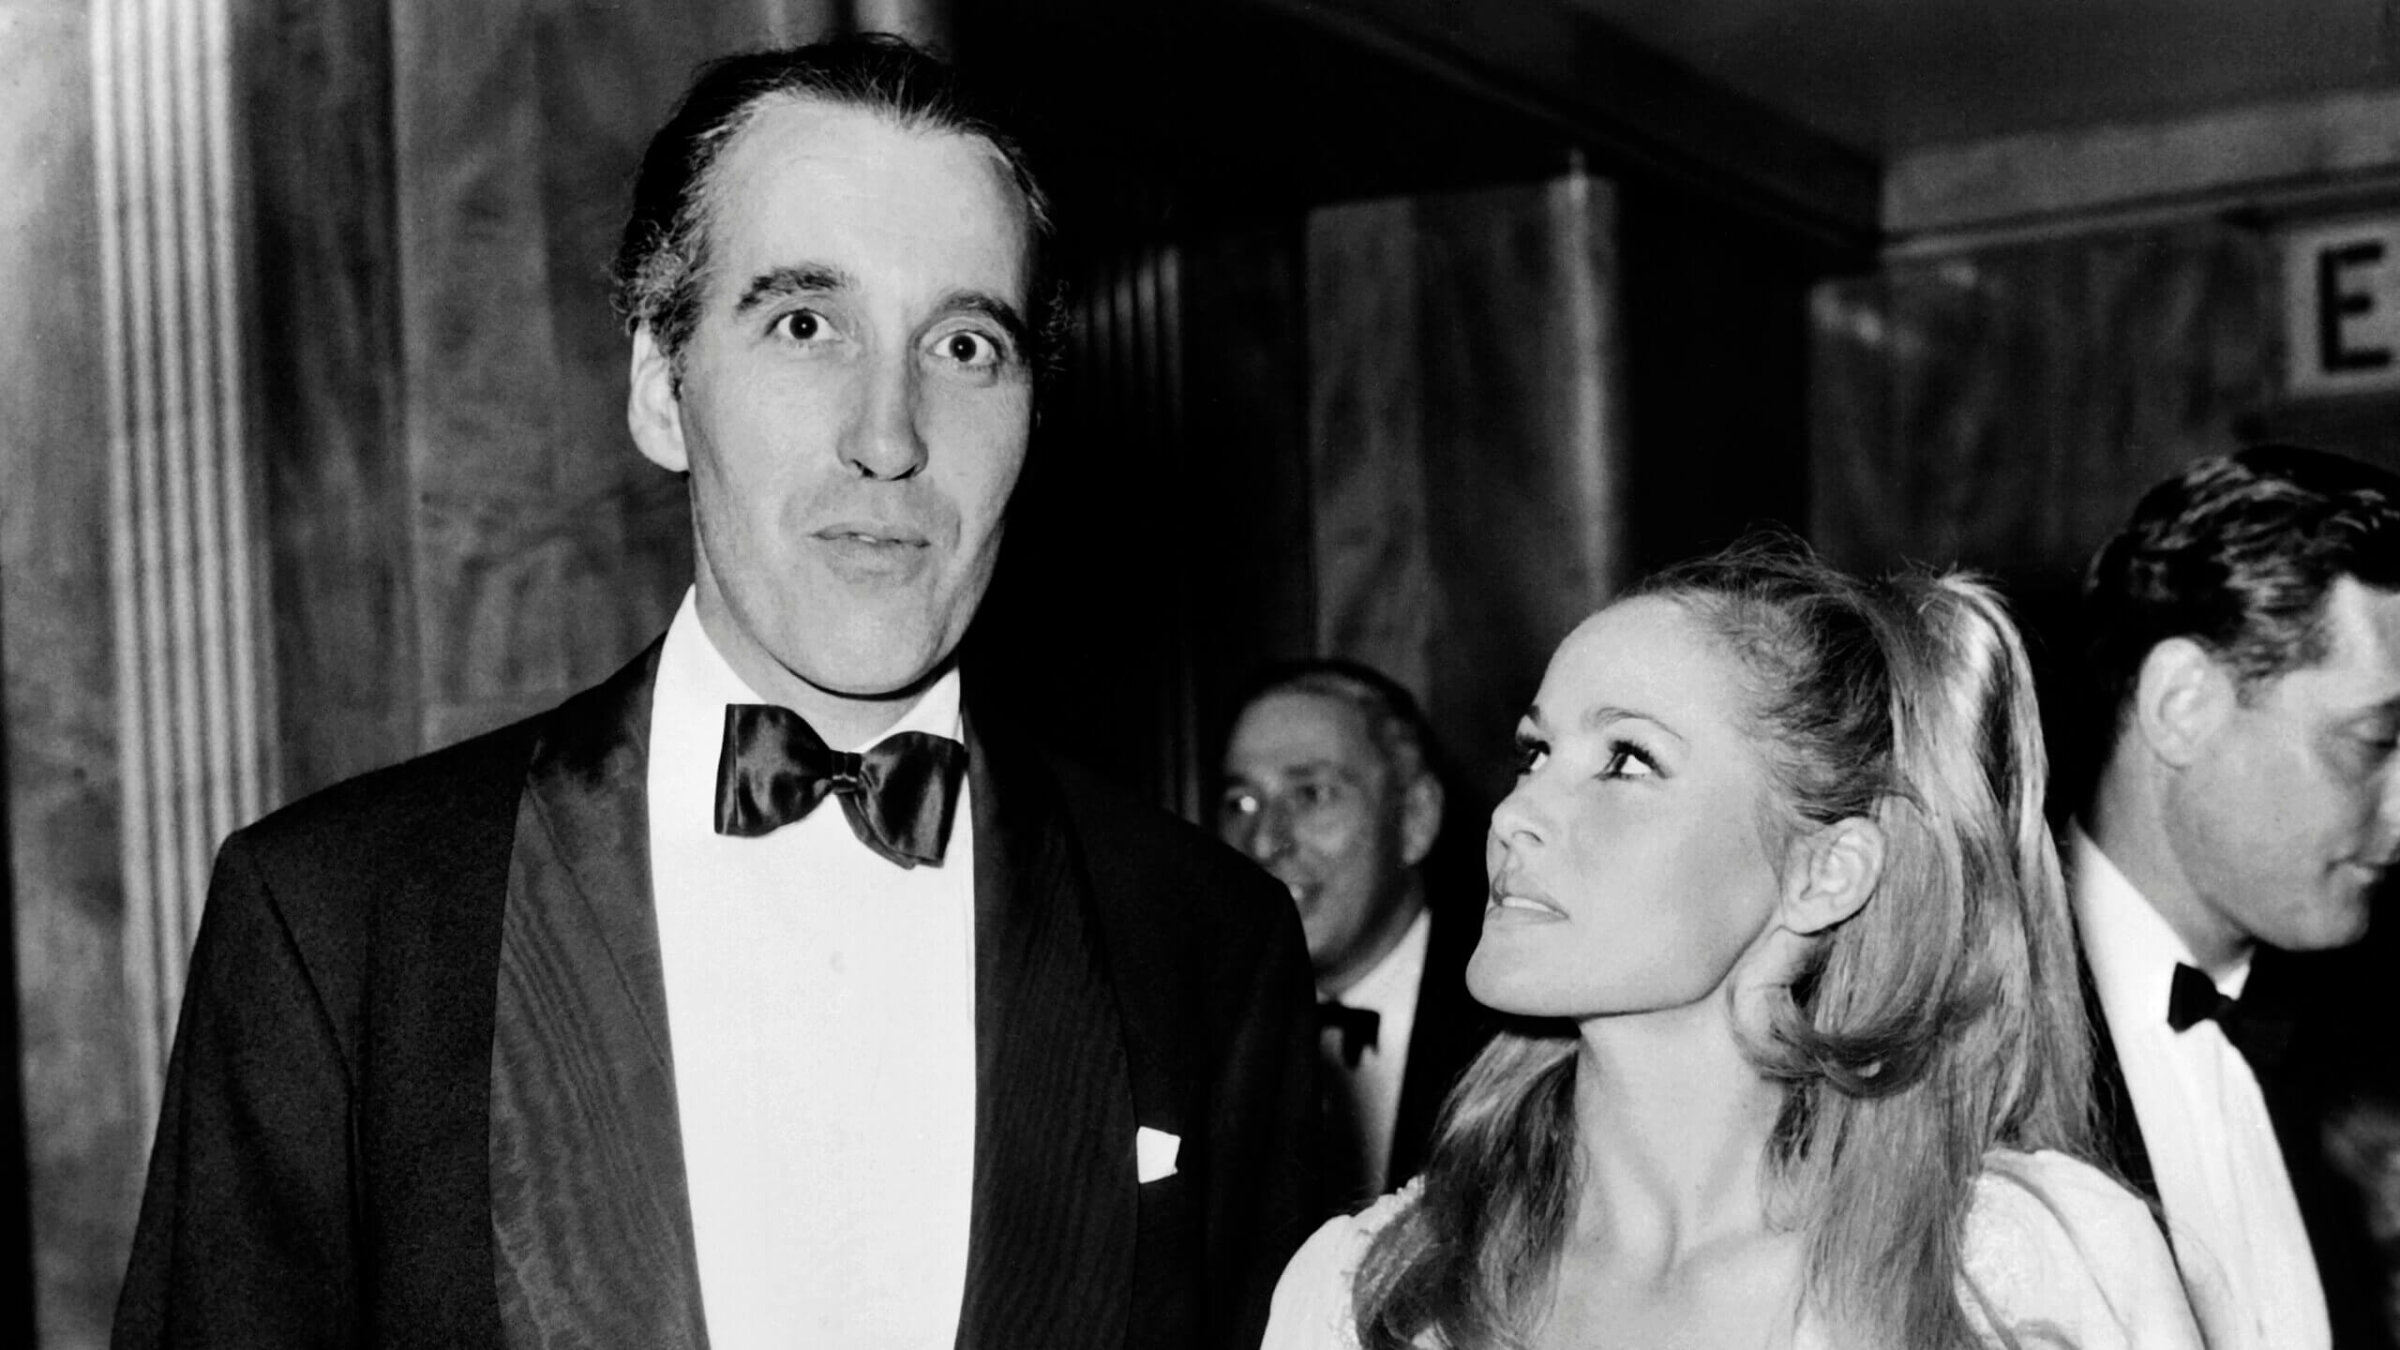 'Wicker Man' star Christopher Lee with Ursula Andress.  